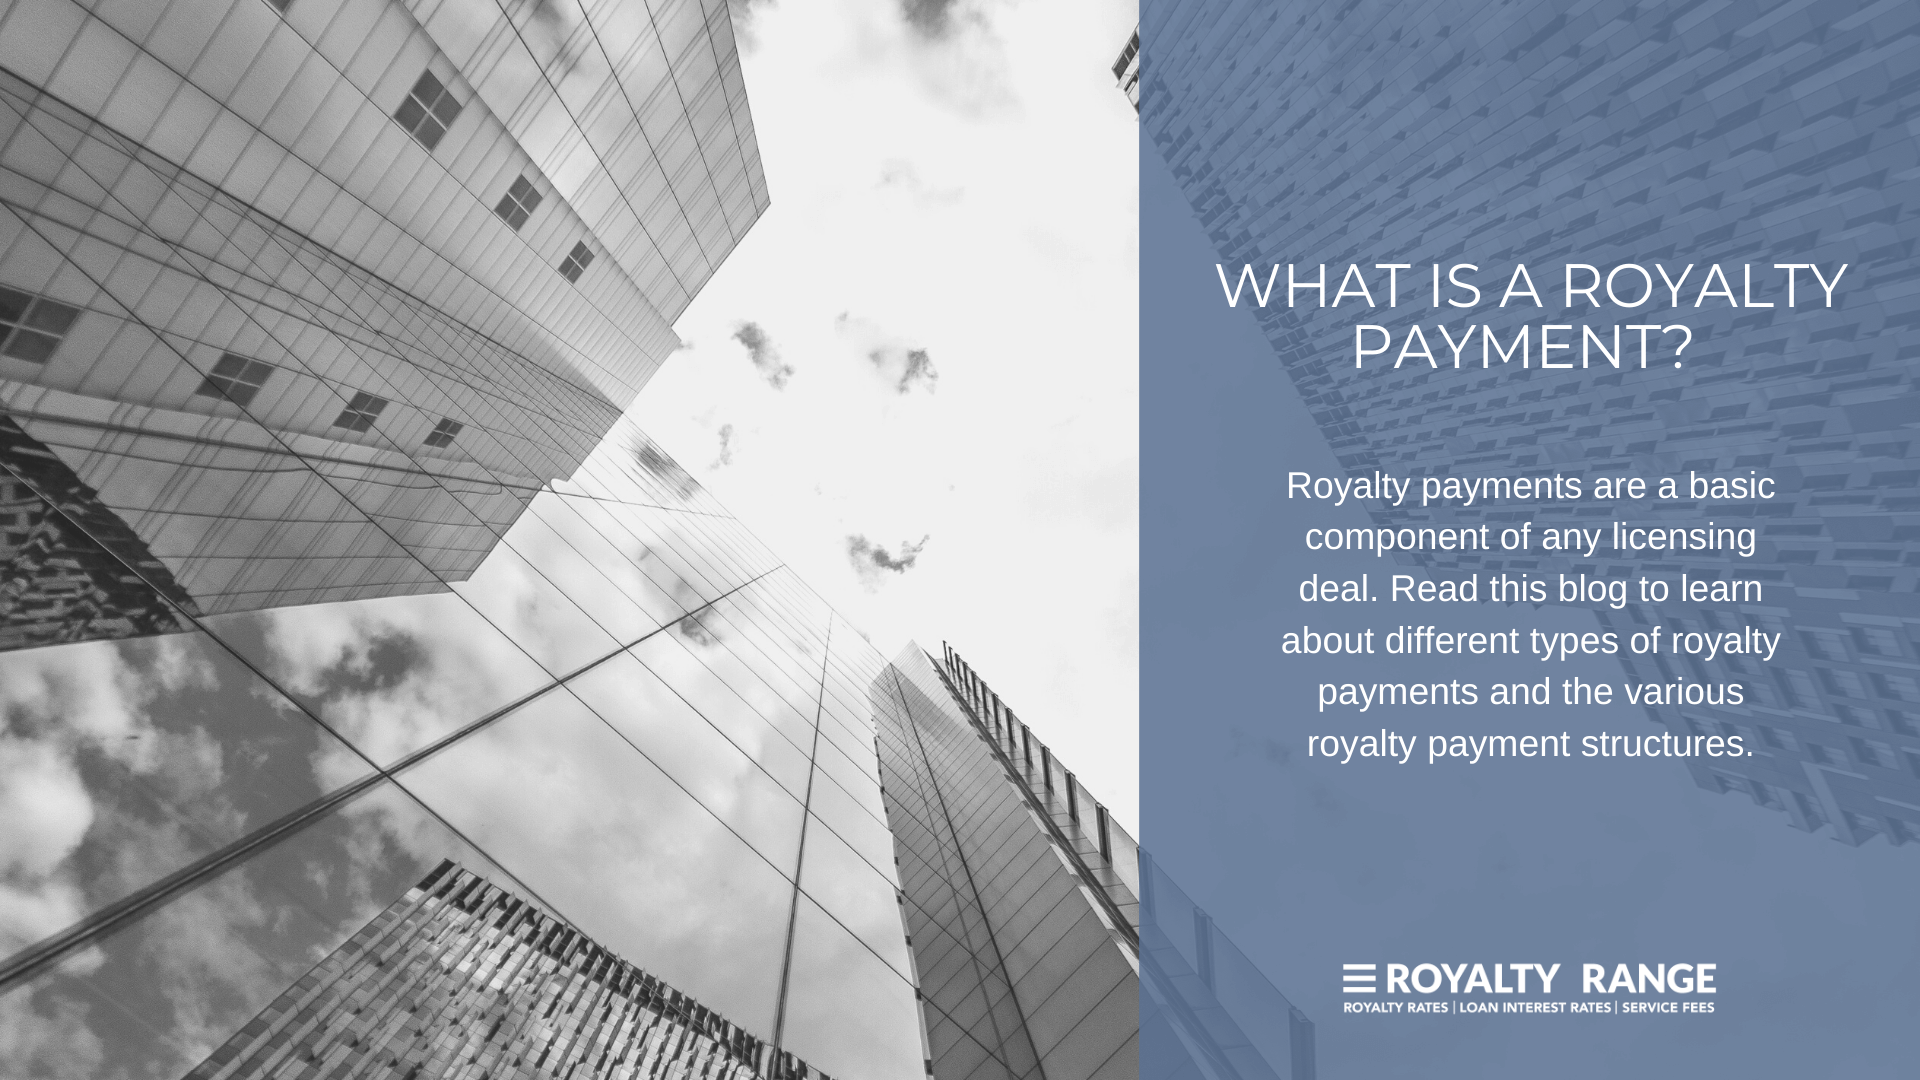 What is a royalty payment